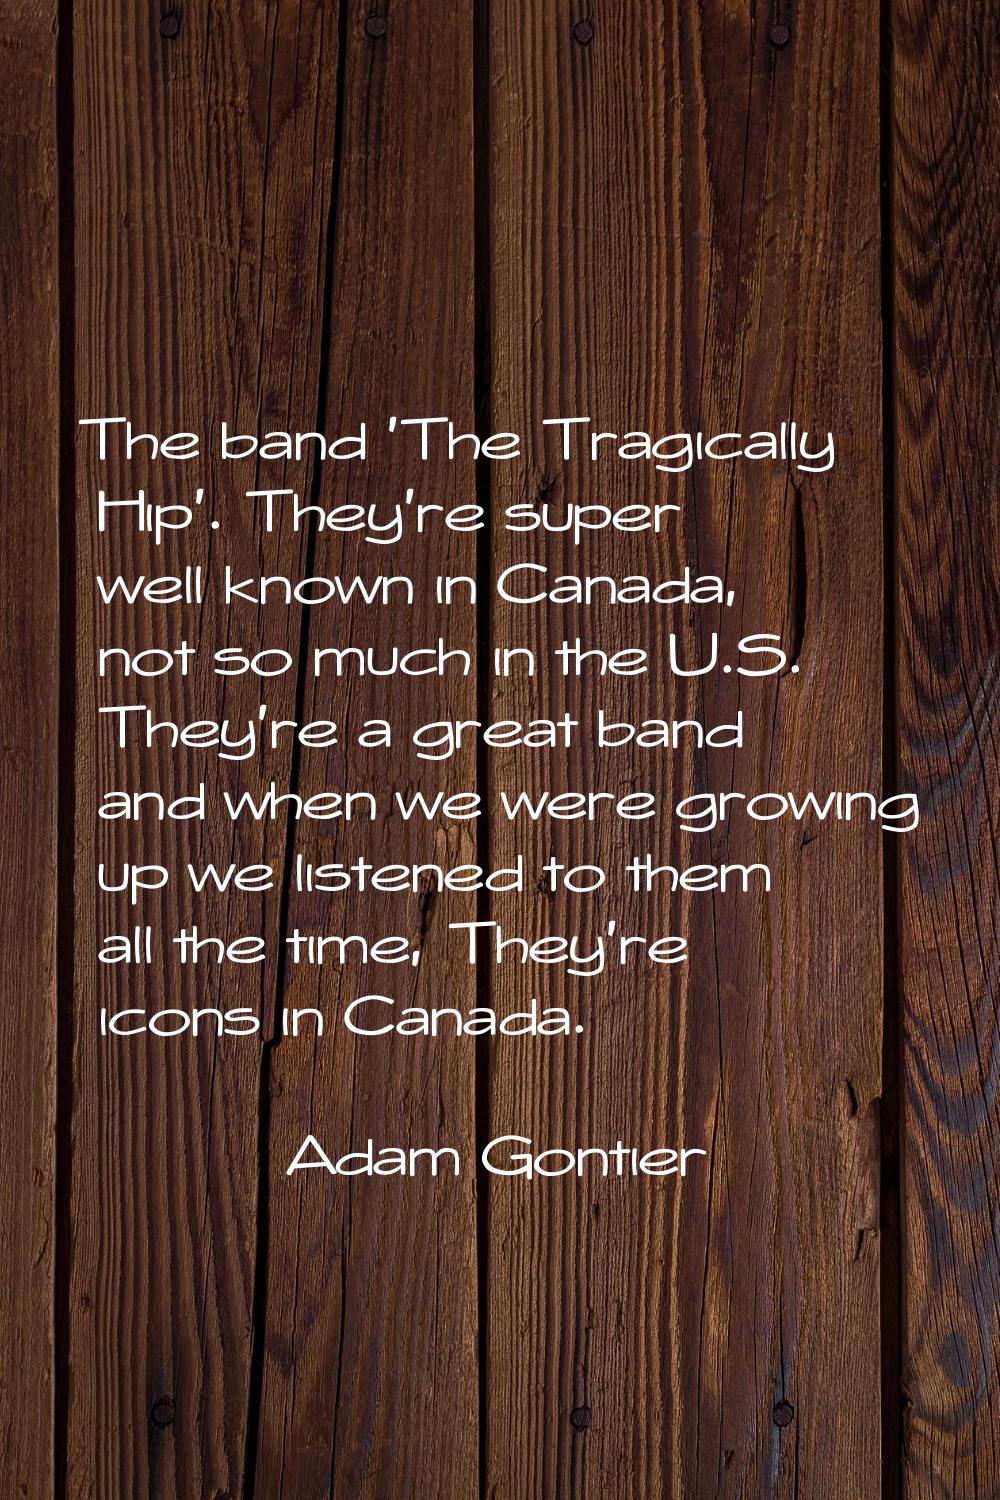 The band 'The Tragically Hip'. They're super well known in Canada, not so much in the U.S. They're 